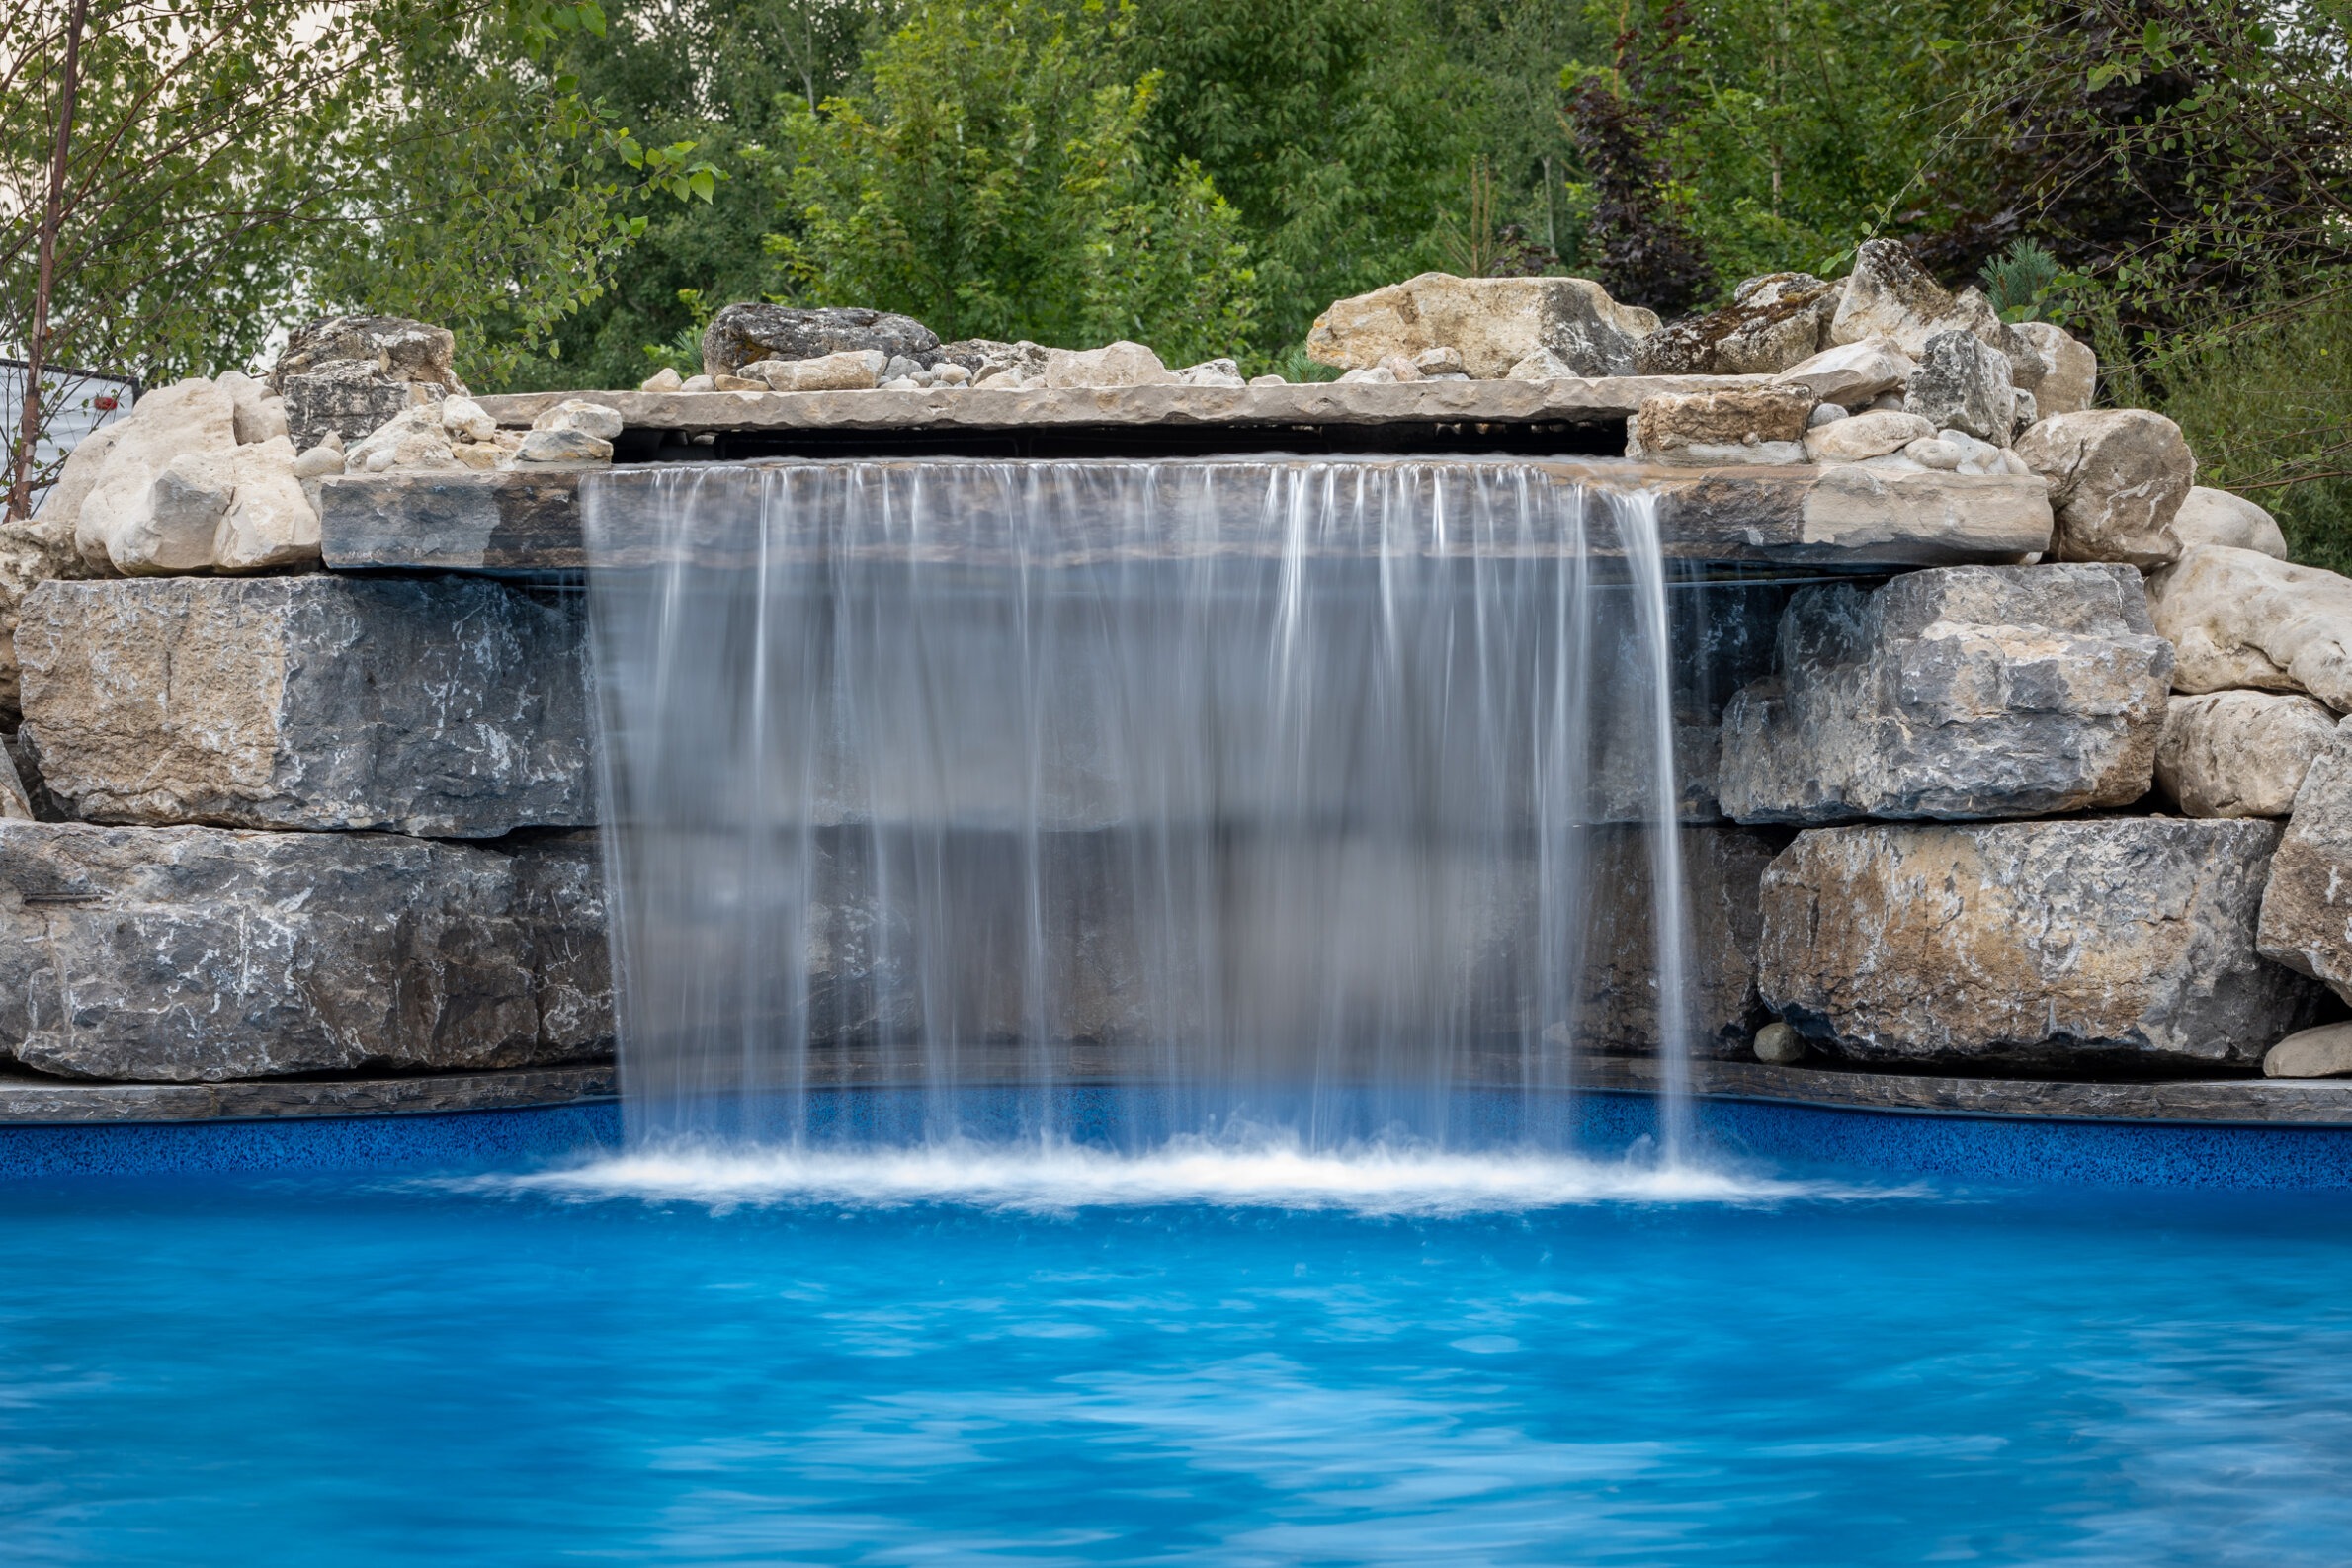 A serene artificial waterfall cascades over textured rocks into a bright blue pool, photographed with a slow shutter speed for a smooth water effect.